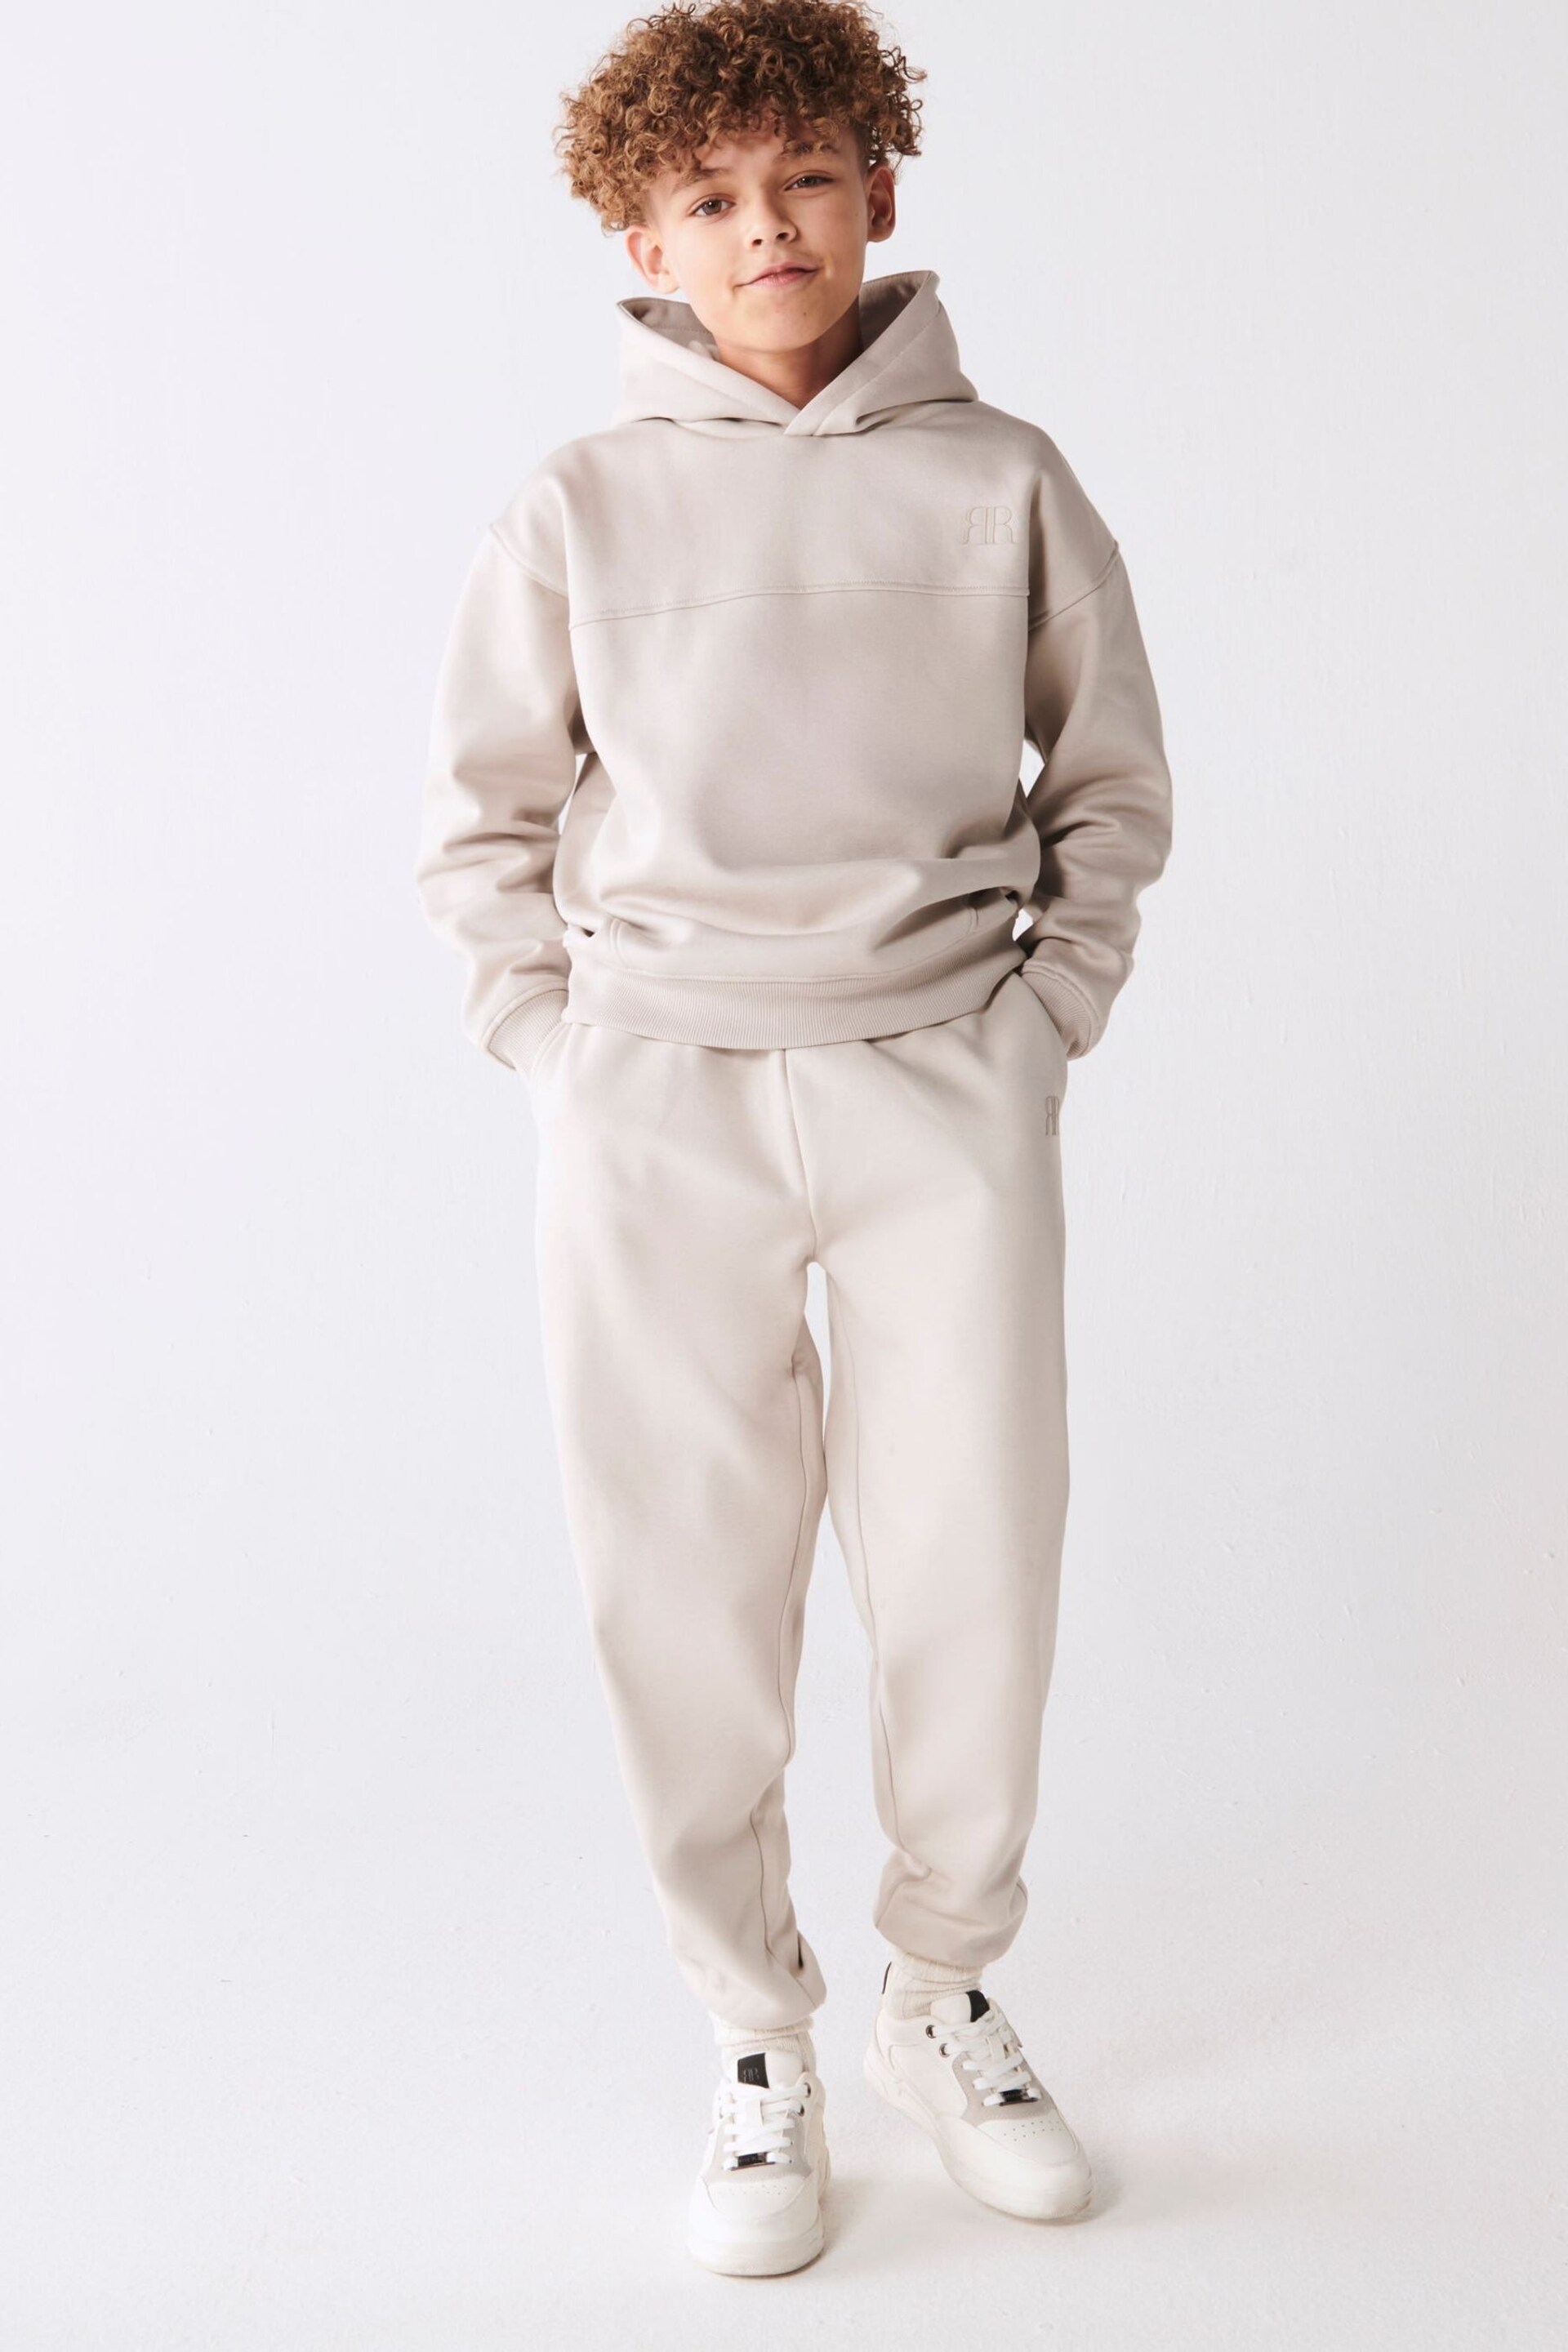 River Island Natural Boys Essentials Hoodie - Image 1 of 6